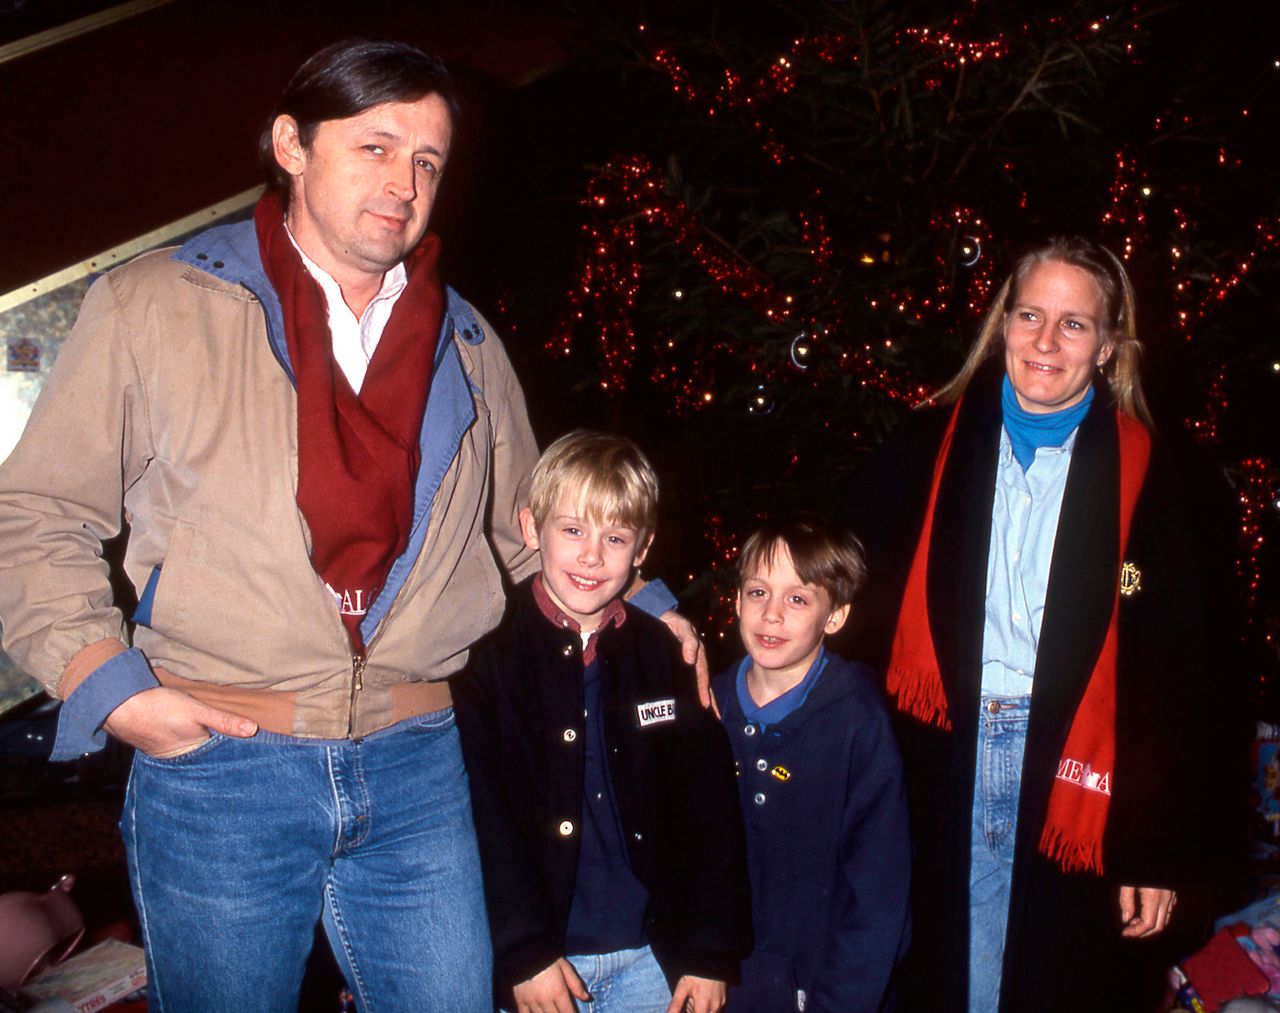 Kit Culkin, Macaulay Culkin, Kieran Culkin and Patricia Bretnup pose for a photo one month after the release of "Home Alone." The father is now estranged from his children. 